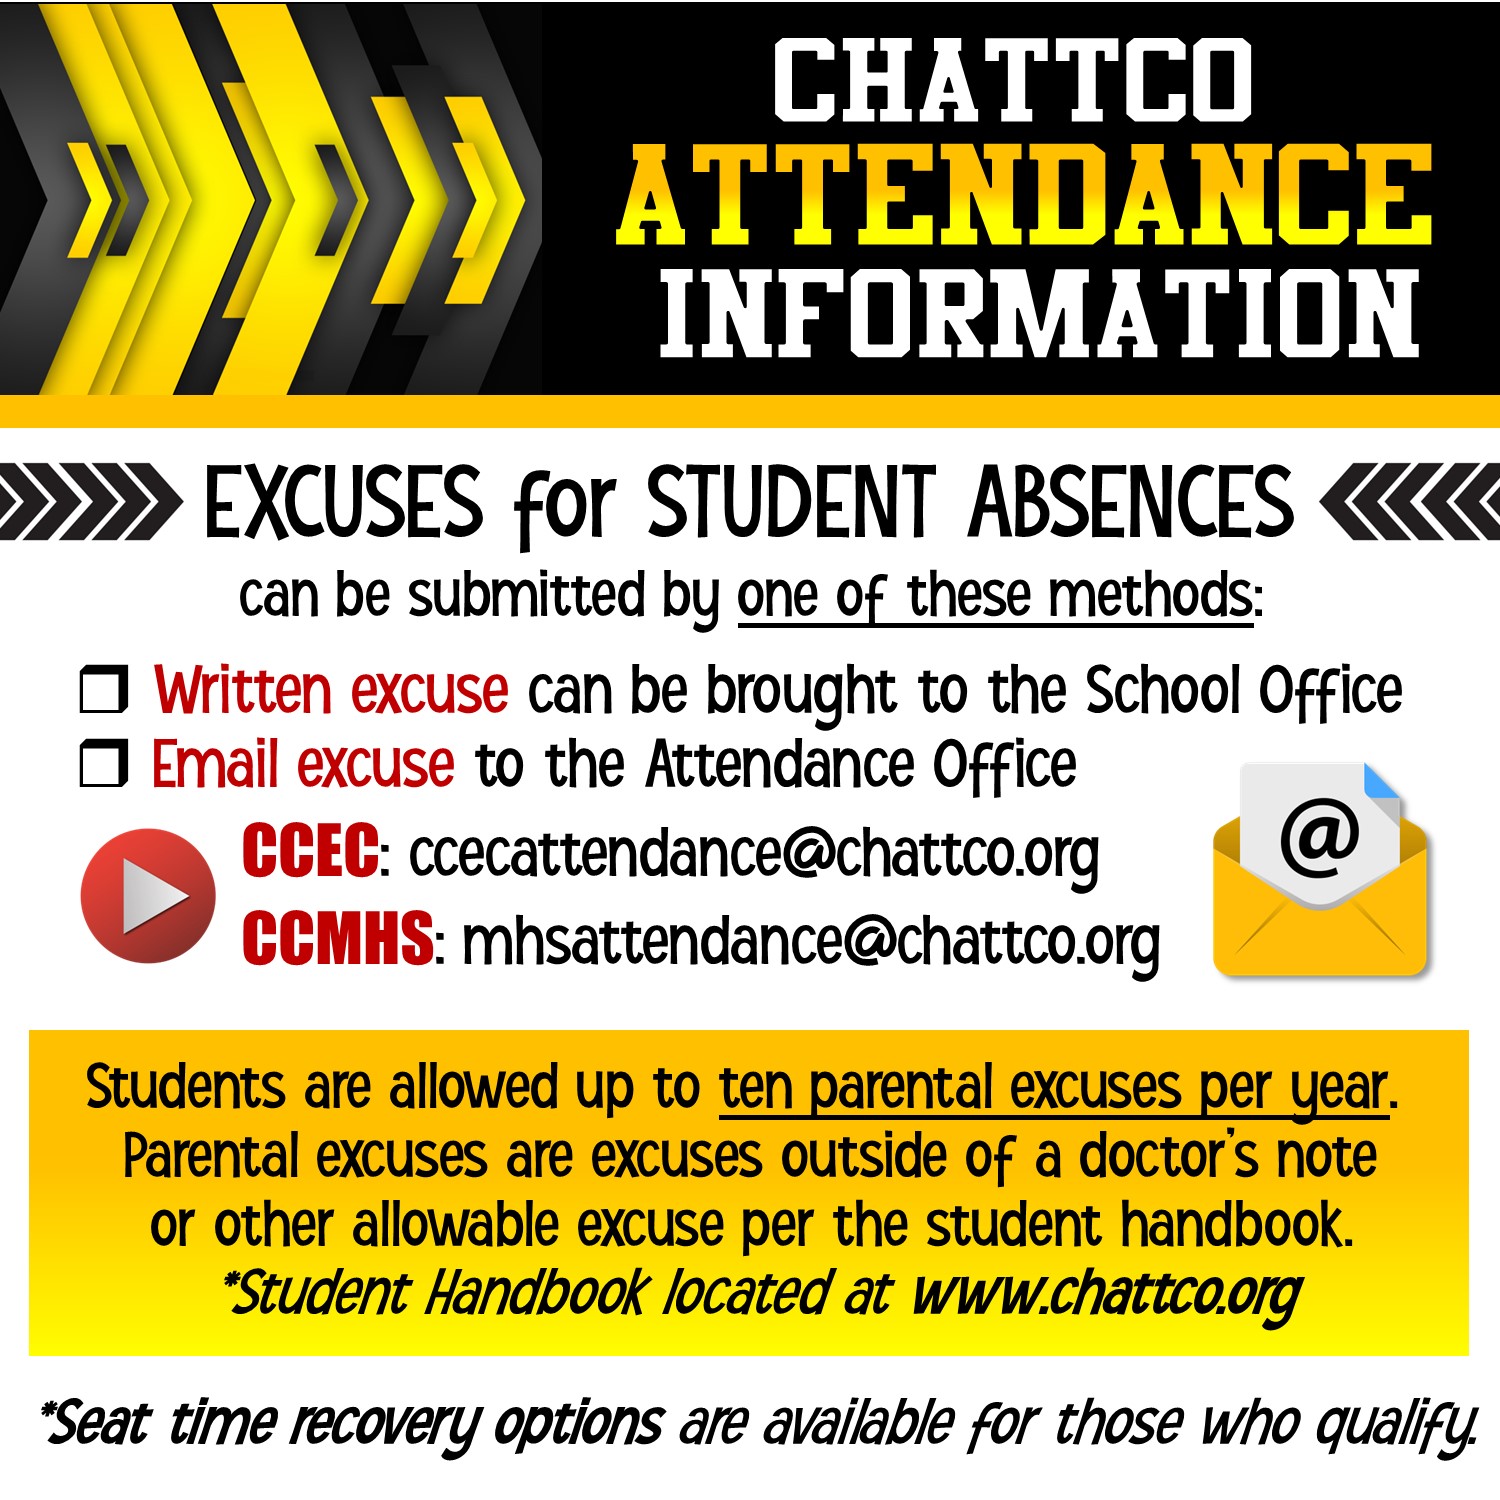 Chattco Attendance Information. Excuses for student absences can be brought into the school or emailed to: CCEC: ccecattendance@chattco.org, CCMHS: mhsattendance@chattco.org. Students are allowed up to ten parental excuses per year.  Parental excuses are excuses outside of a doctor’s note or other allowable excuse per the student handbook. Credit recovery options are available for those who qualify.